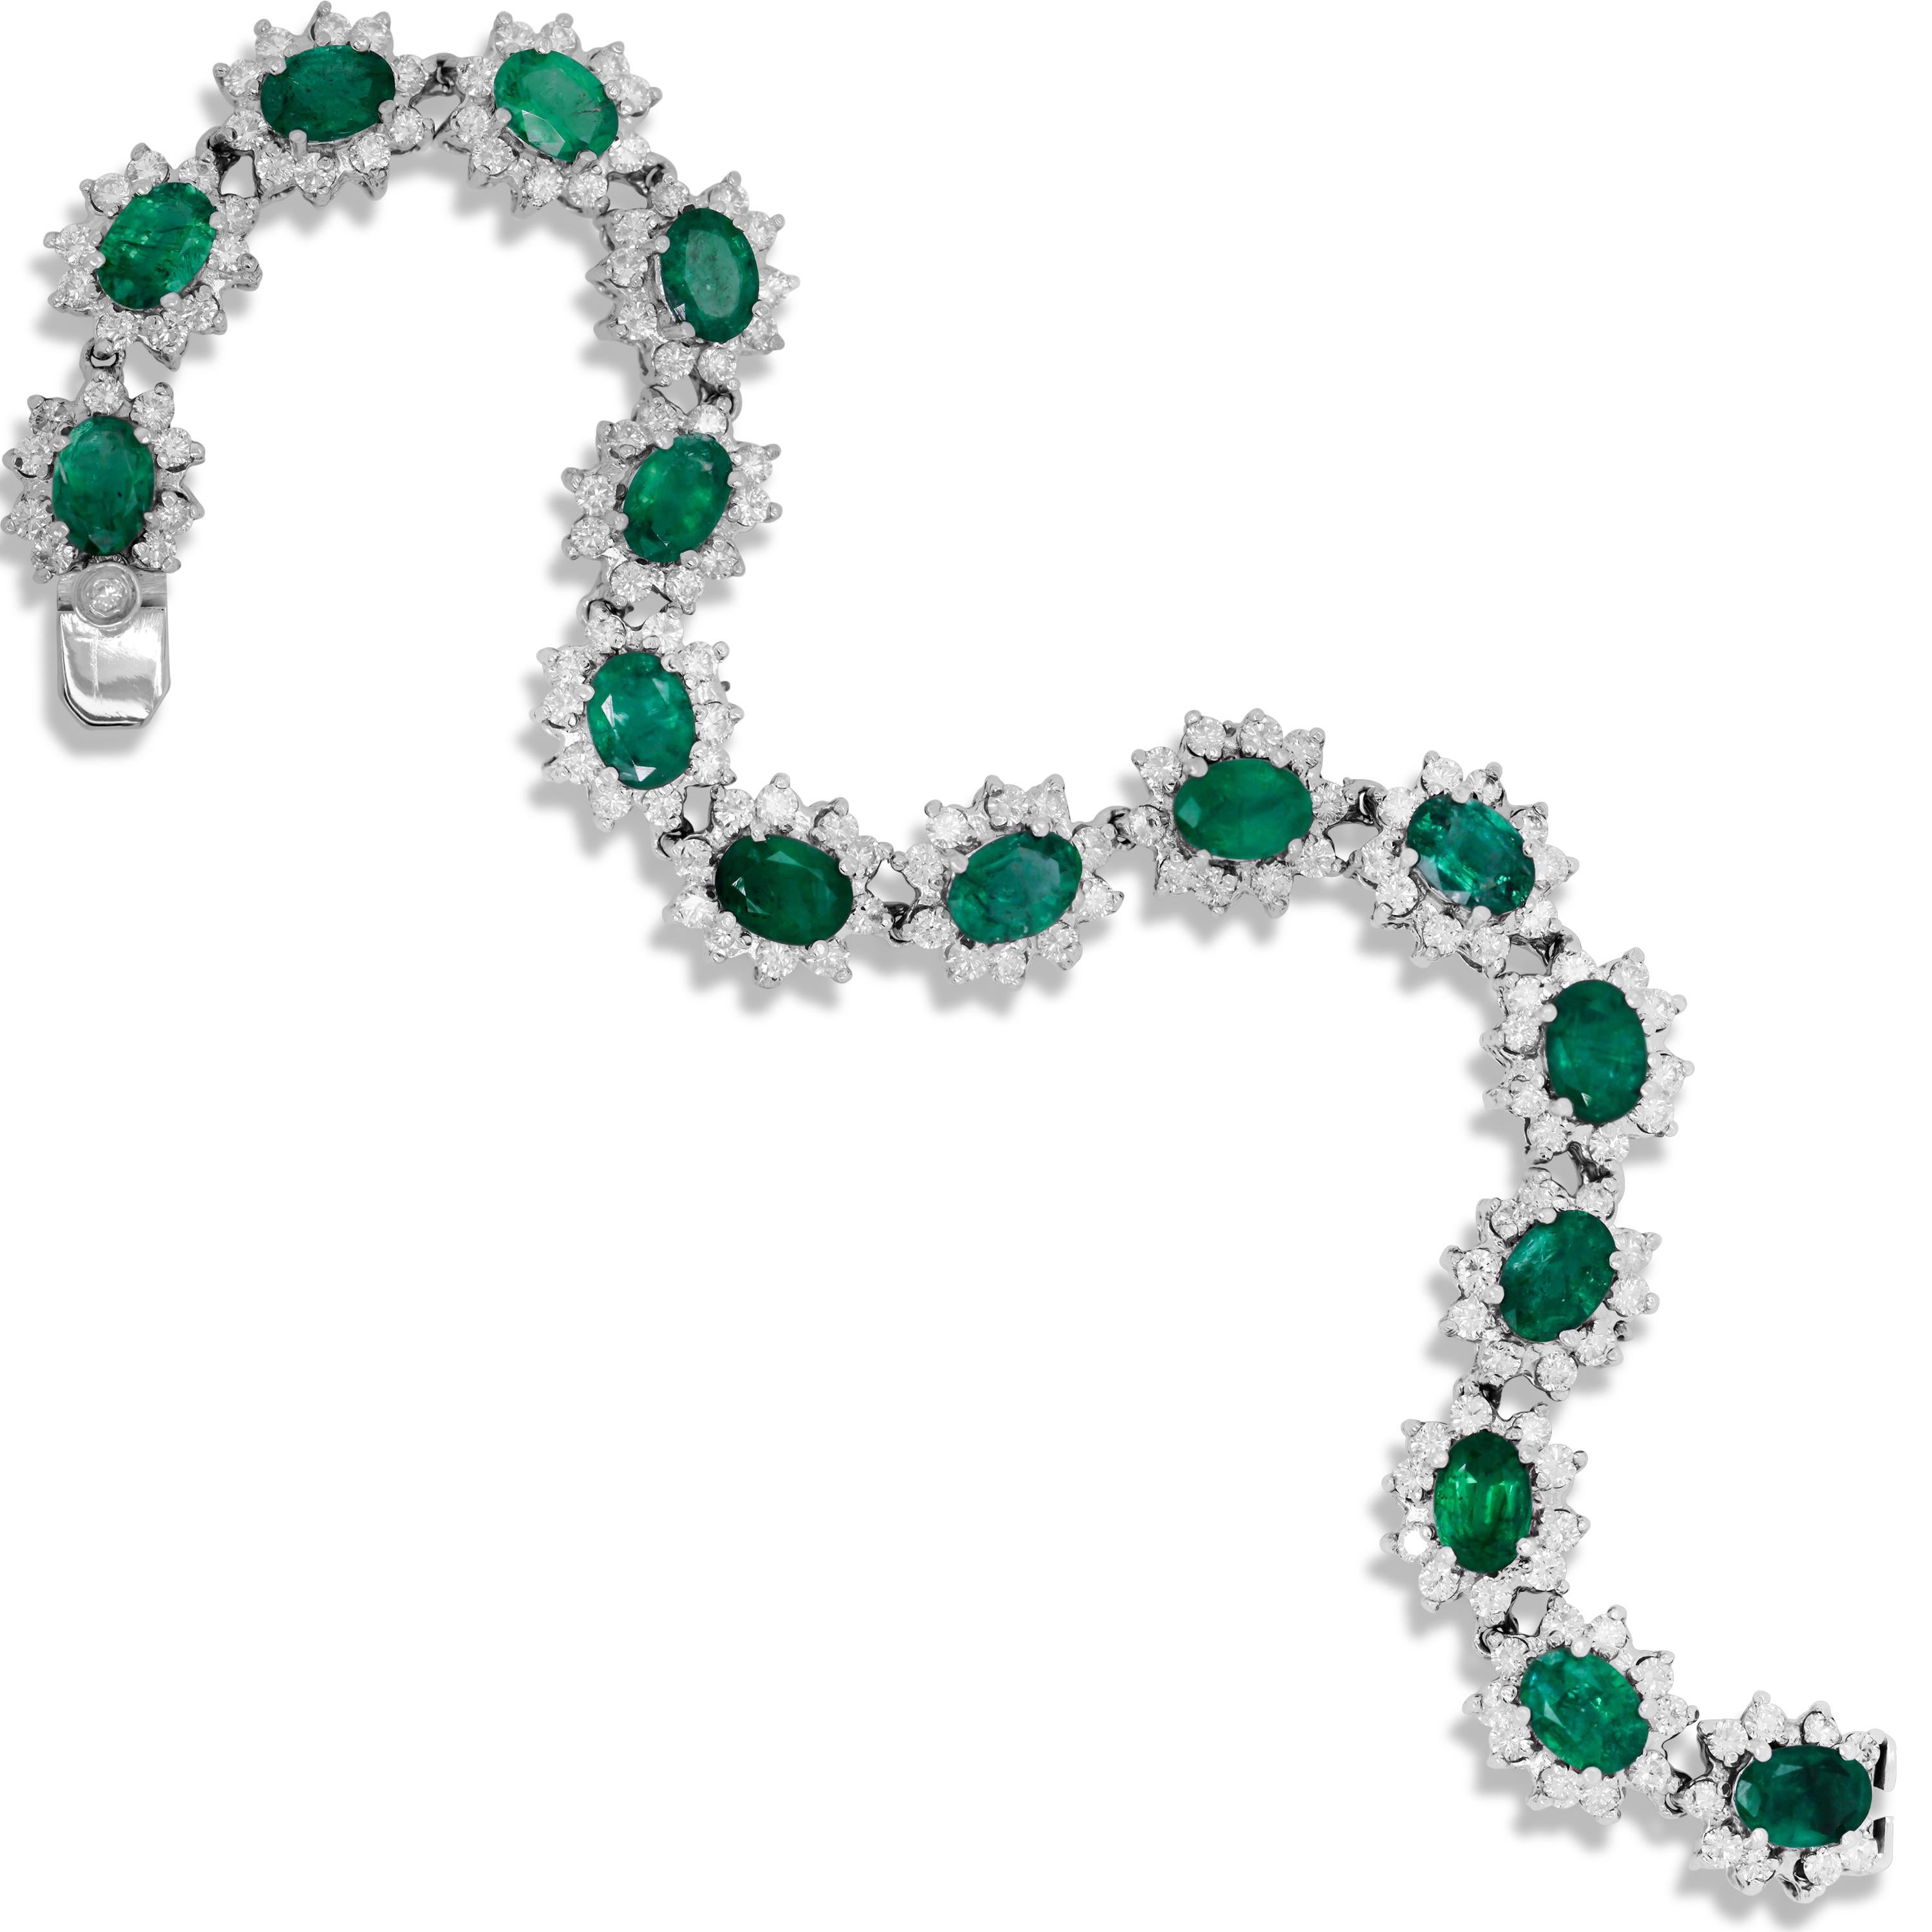 Contemporary White Gold and Diamond Bracelet with Oval Cut Zambian Emeralds